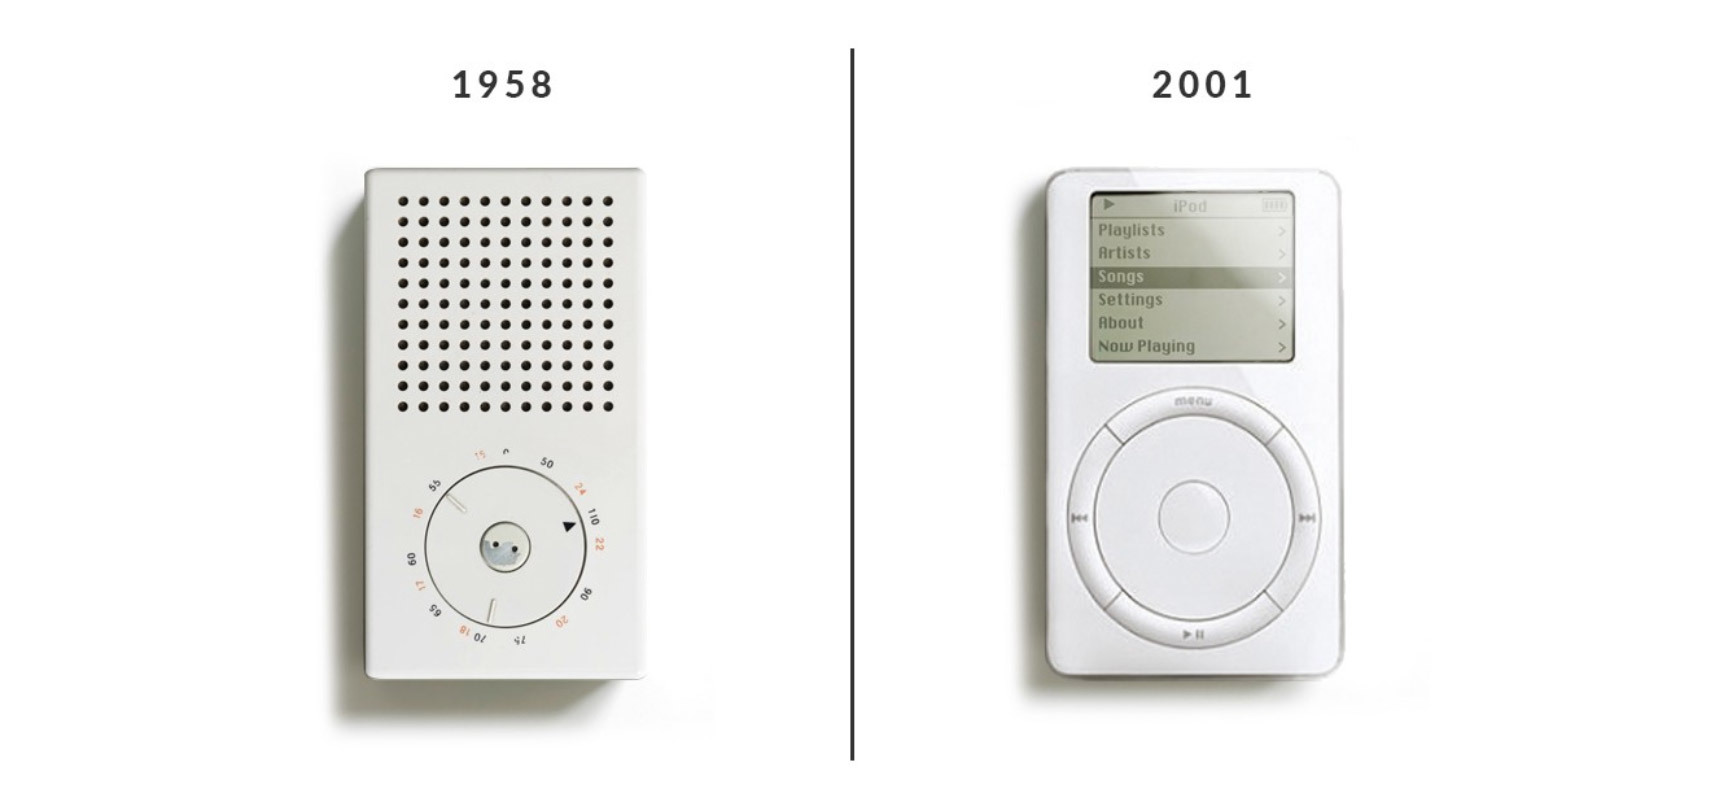 T3 Transistor Radio and the first Apple iPod